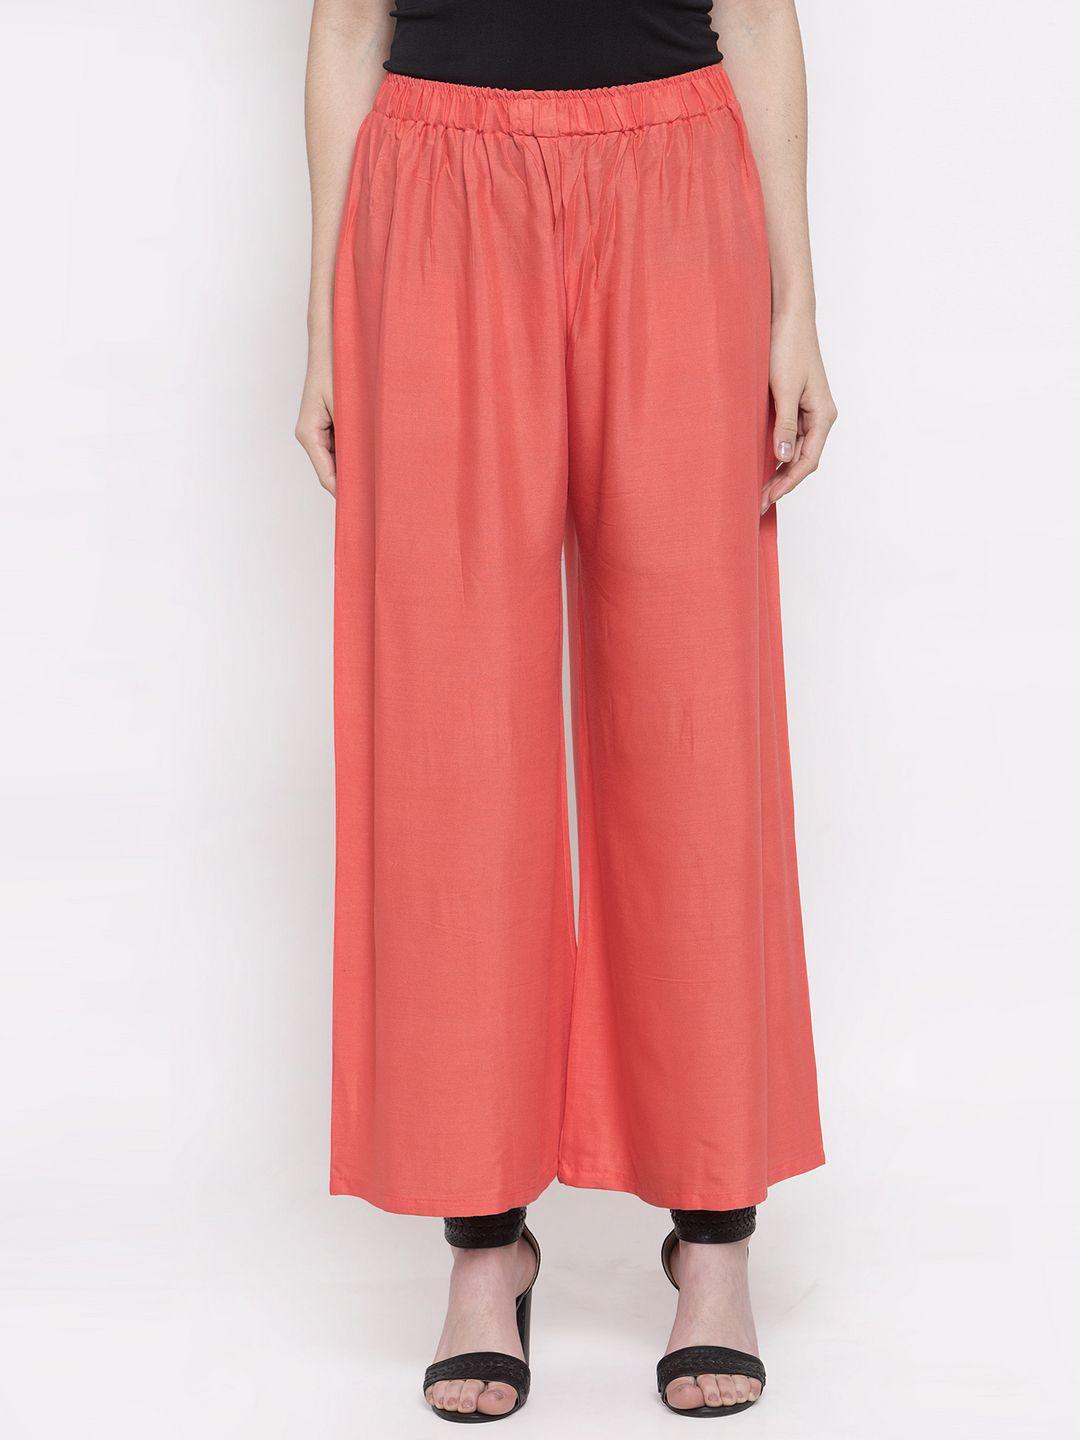 tag 7 women peach-coloured solid flared palazzos